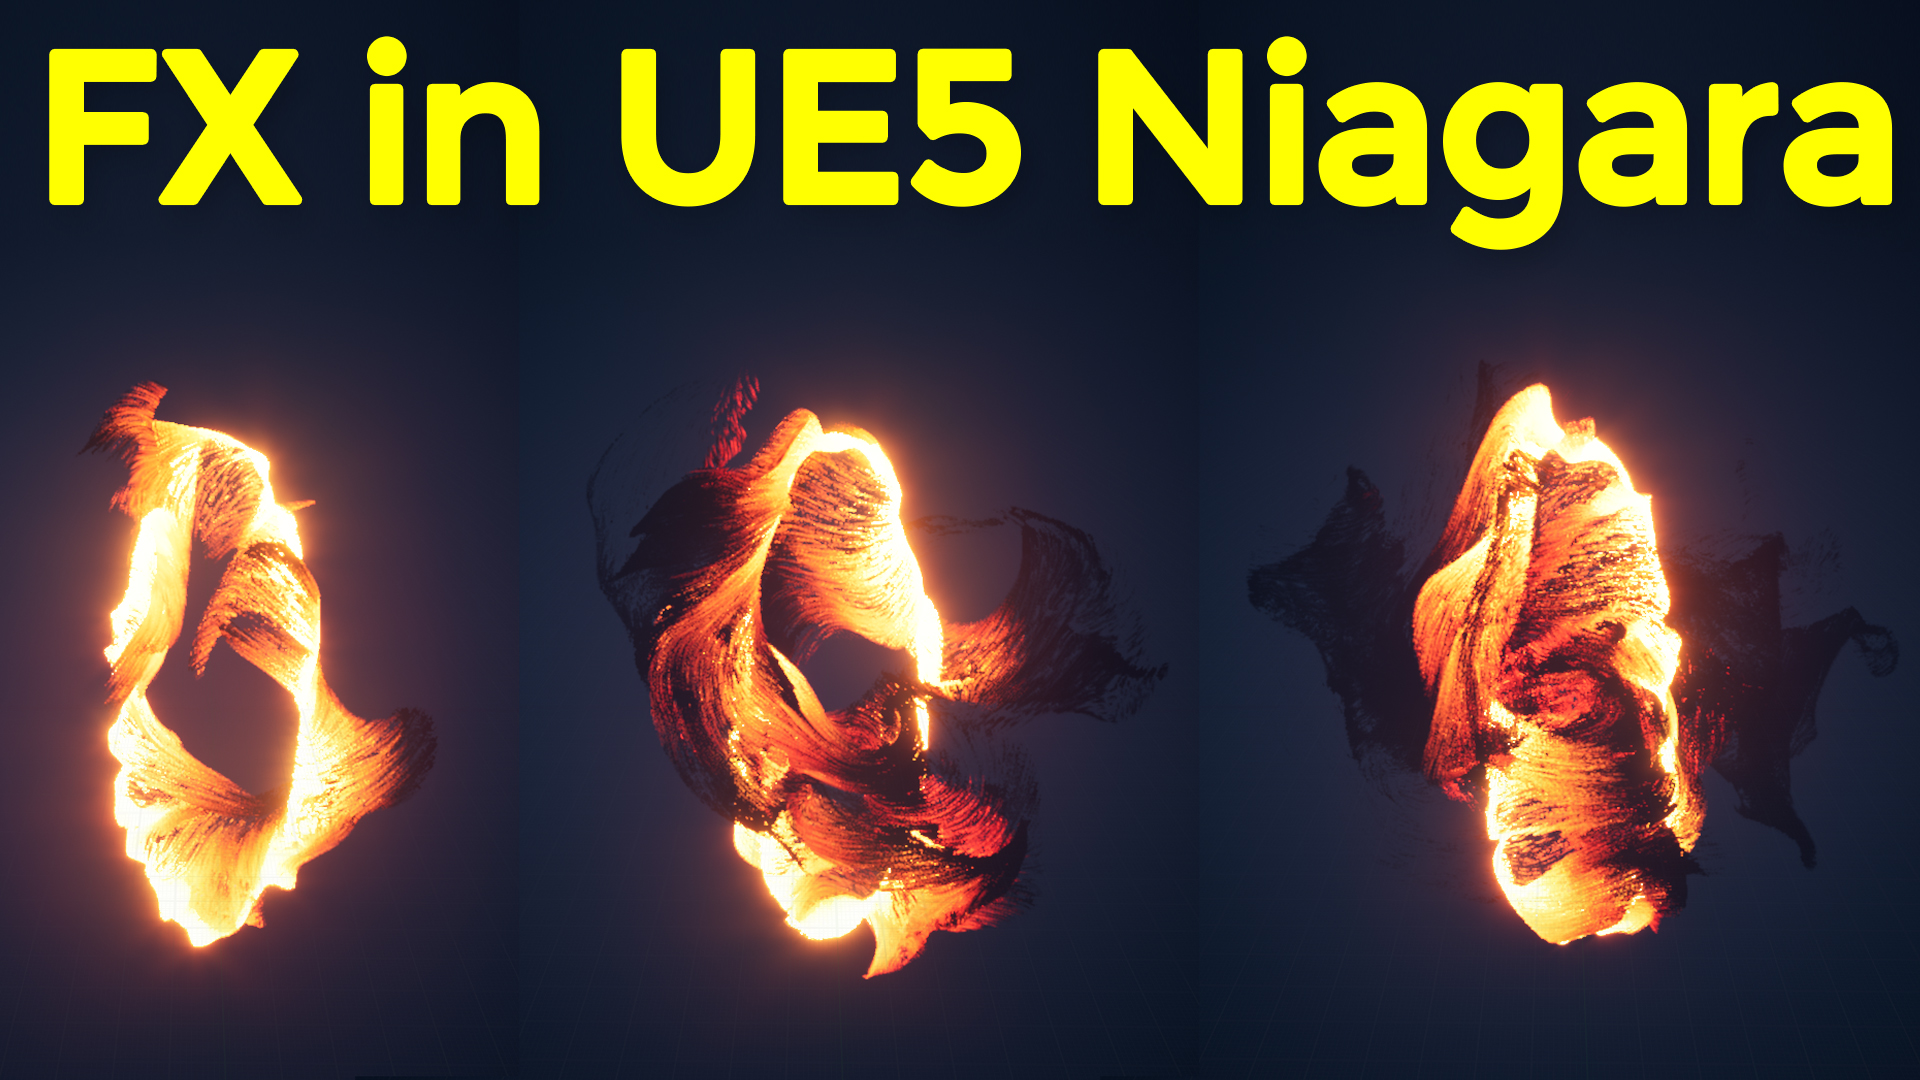 Make this FX in UE5 Niagara and Download from Patreon